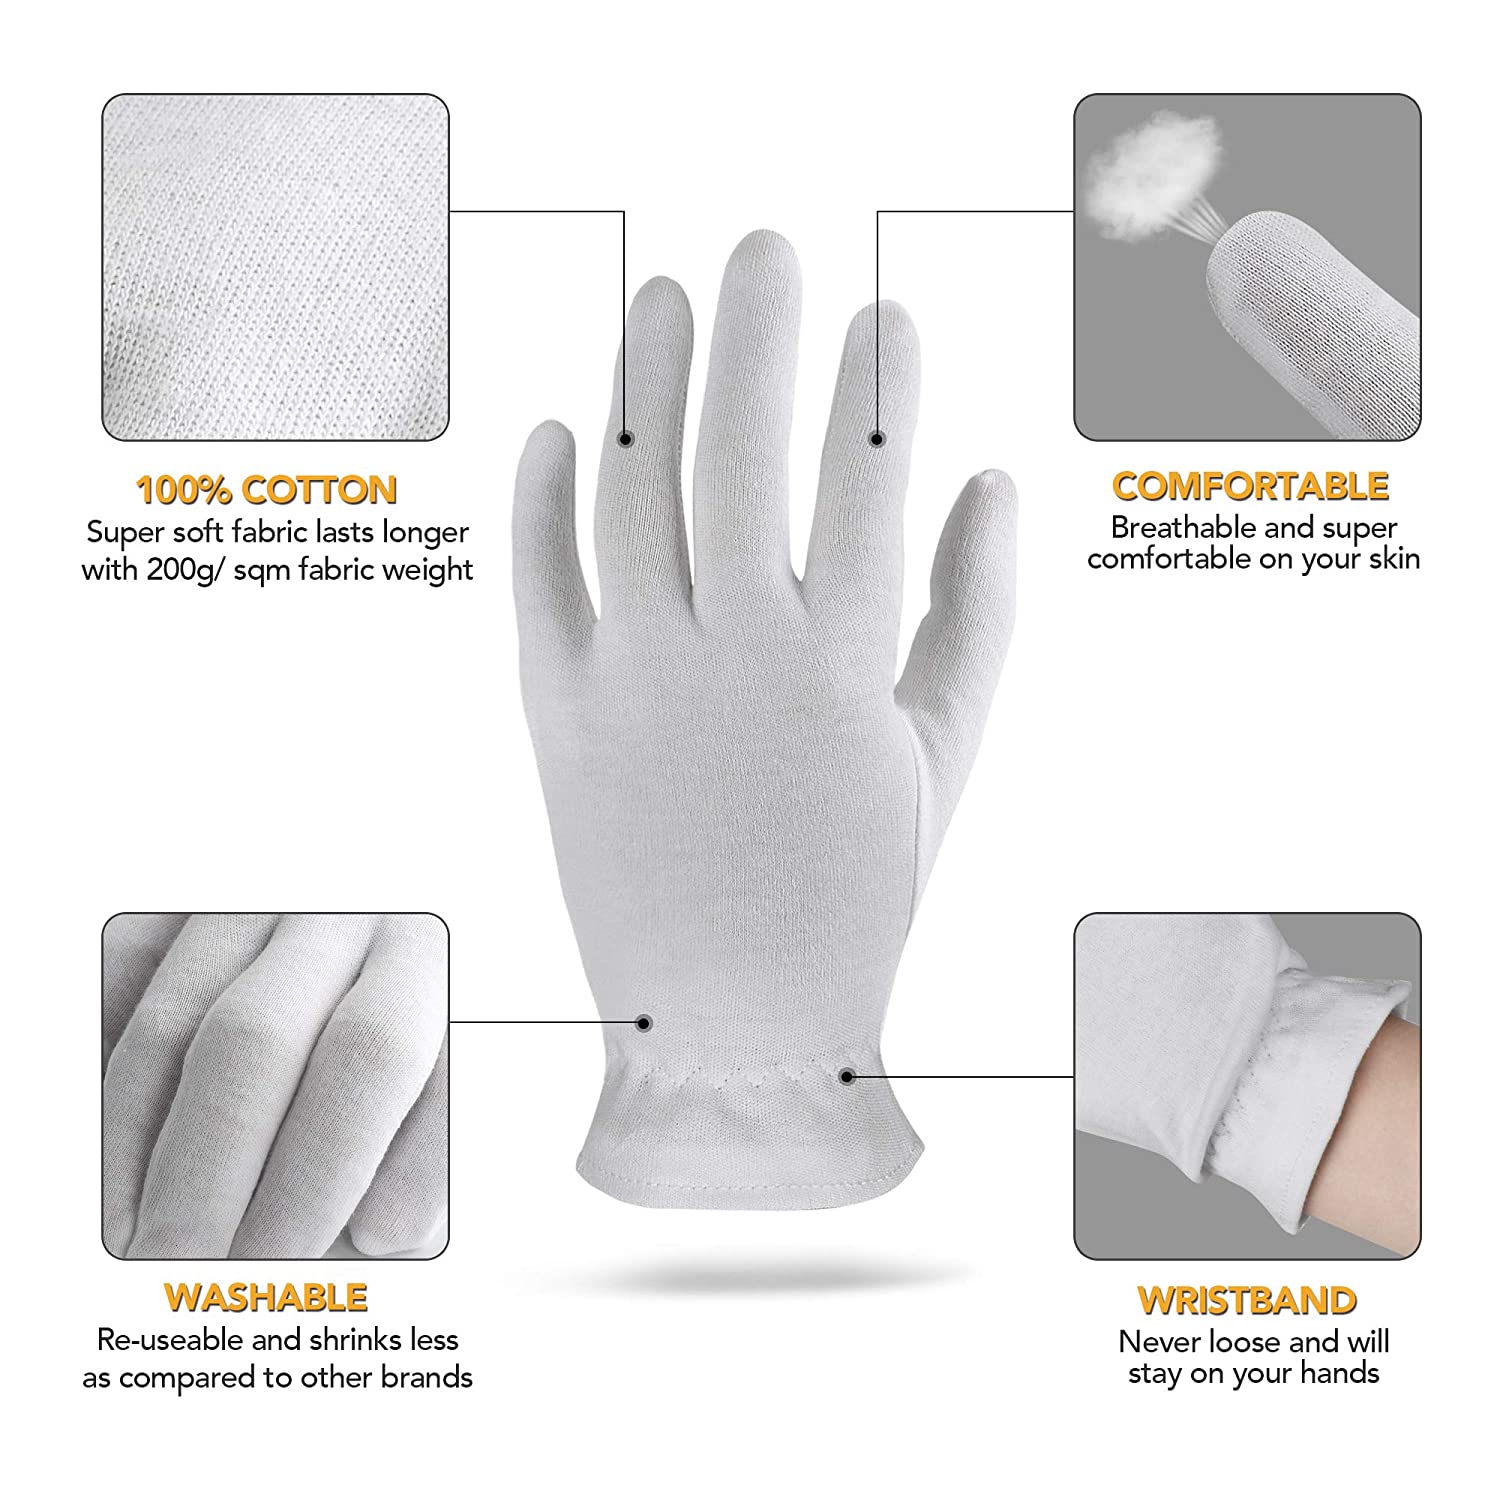 Akrilane - XS Extra Small Cotton Gloves For Dry Hands, Moisturizing Gloves Overnight, Eczema Treatment, Skin Spa Therapy, Cosmetic Jewelry Inspection Premium Quality - Akrilane